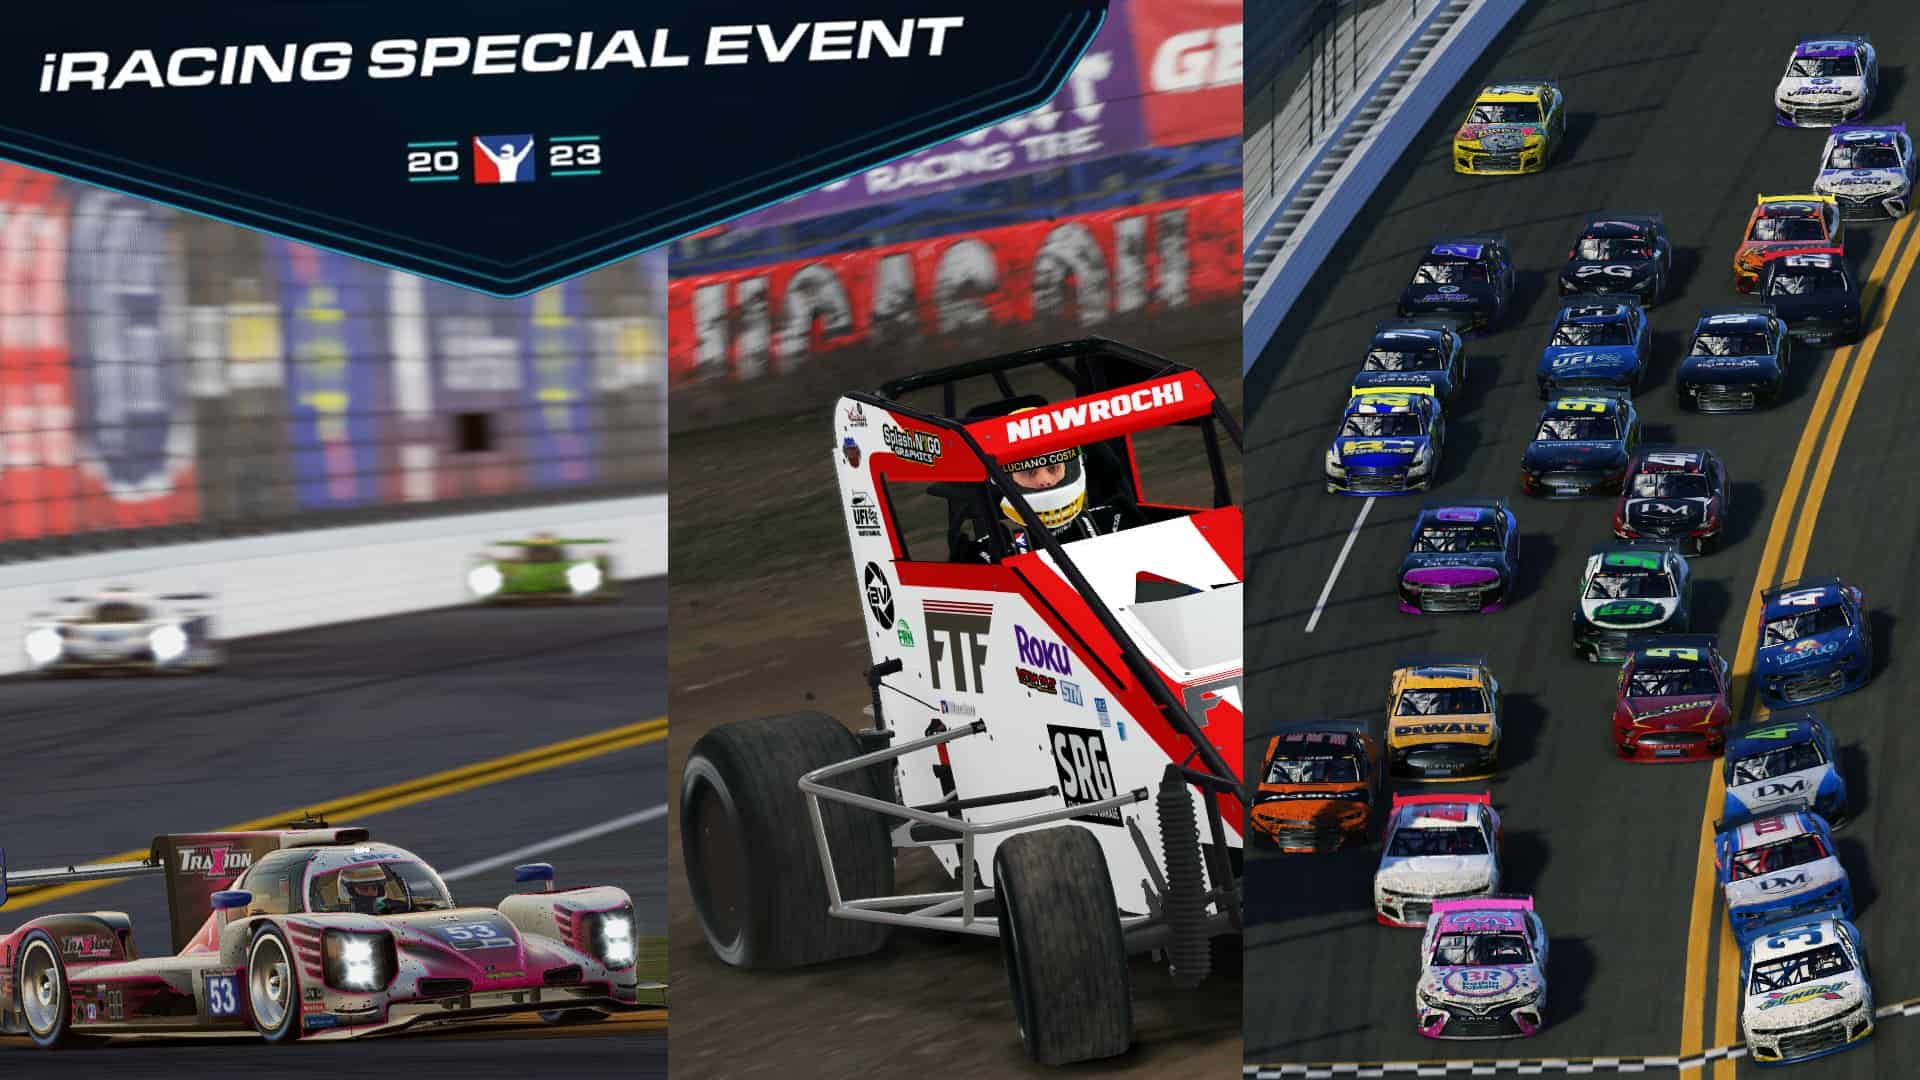 Your guide to iRacing's Special Events